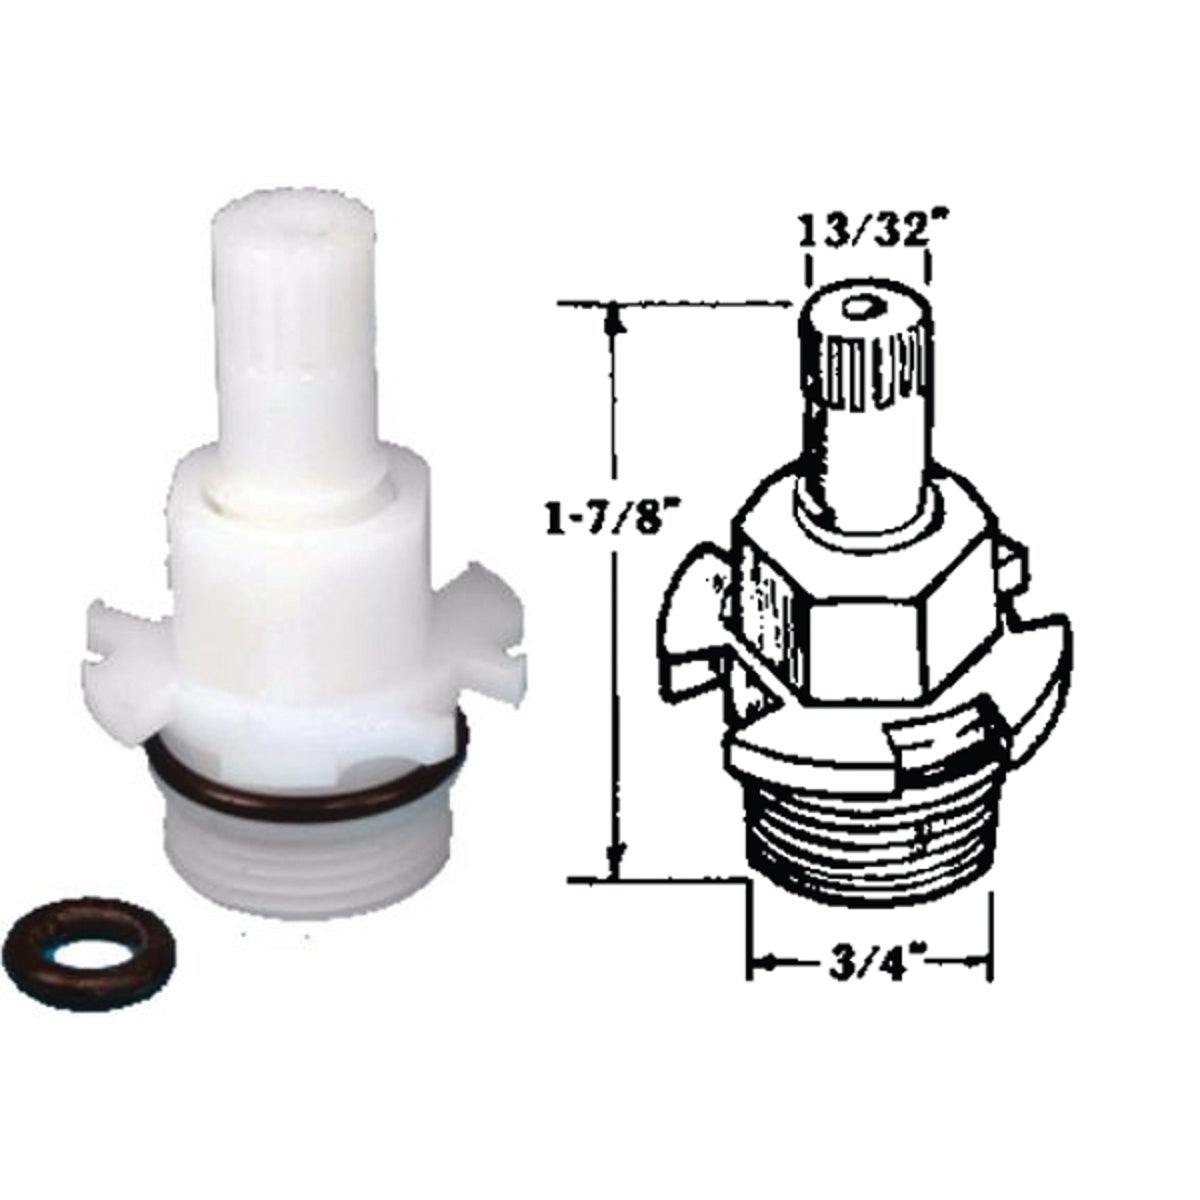 Item 220639, Faucet stem for Utopia washerless tub and shower faucet - hot or cold.